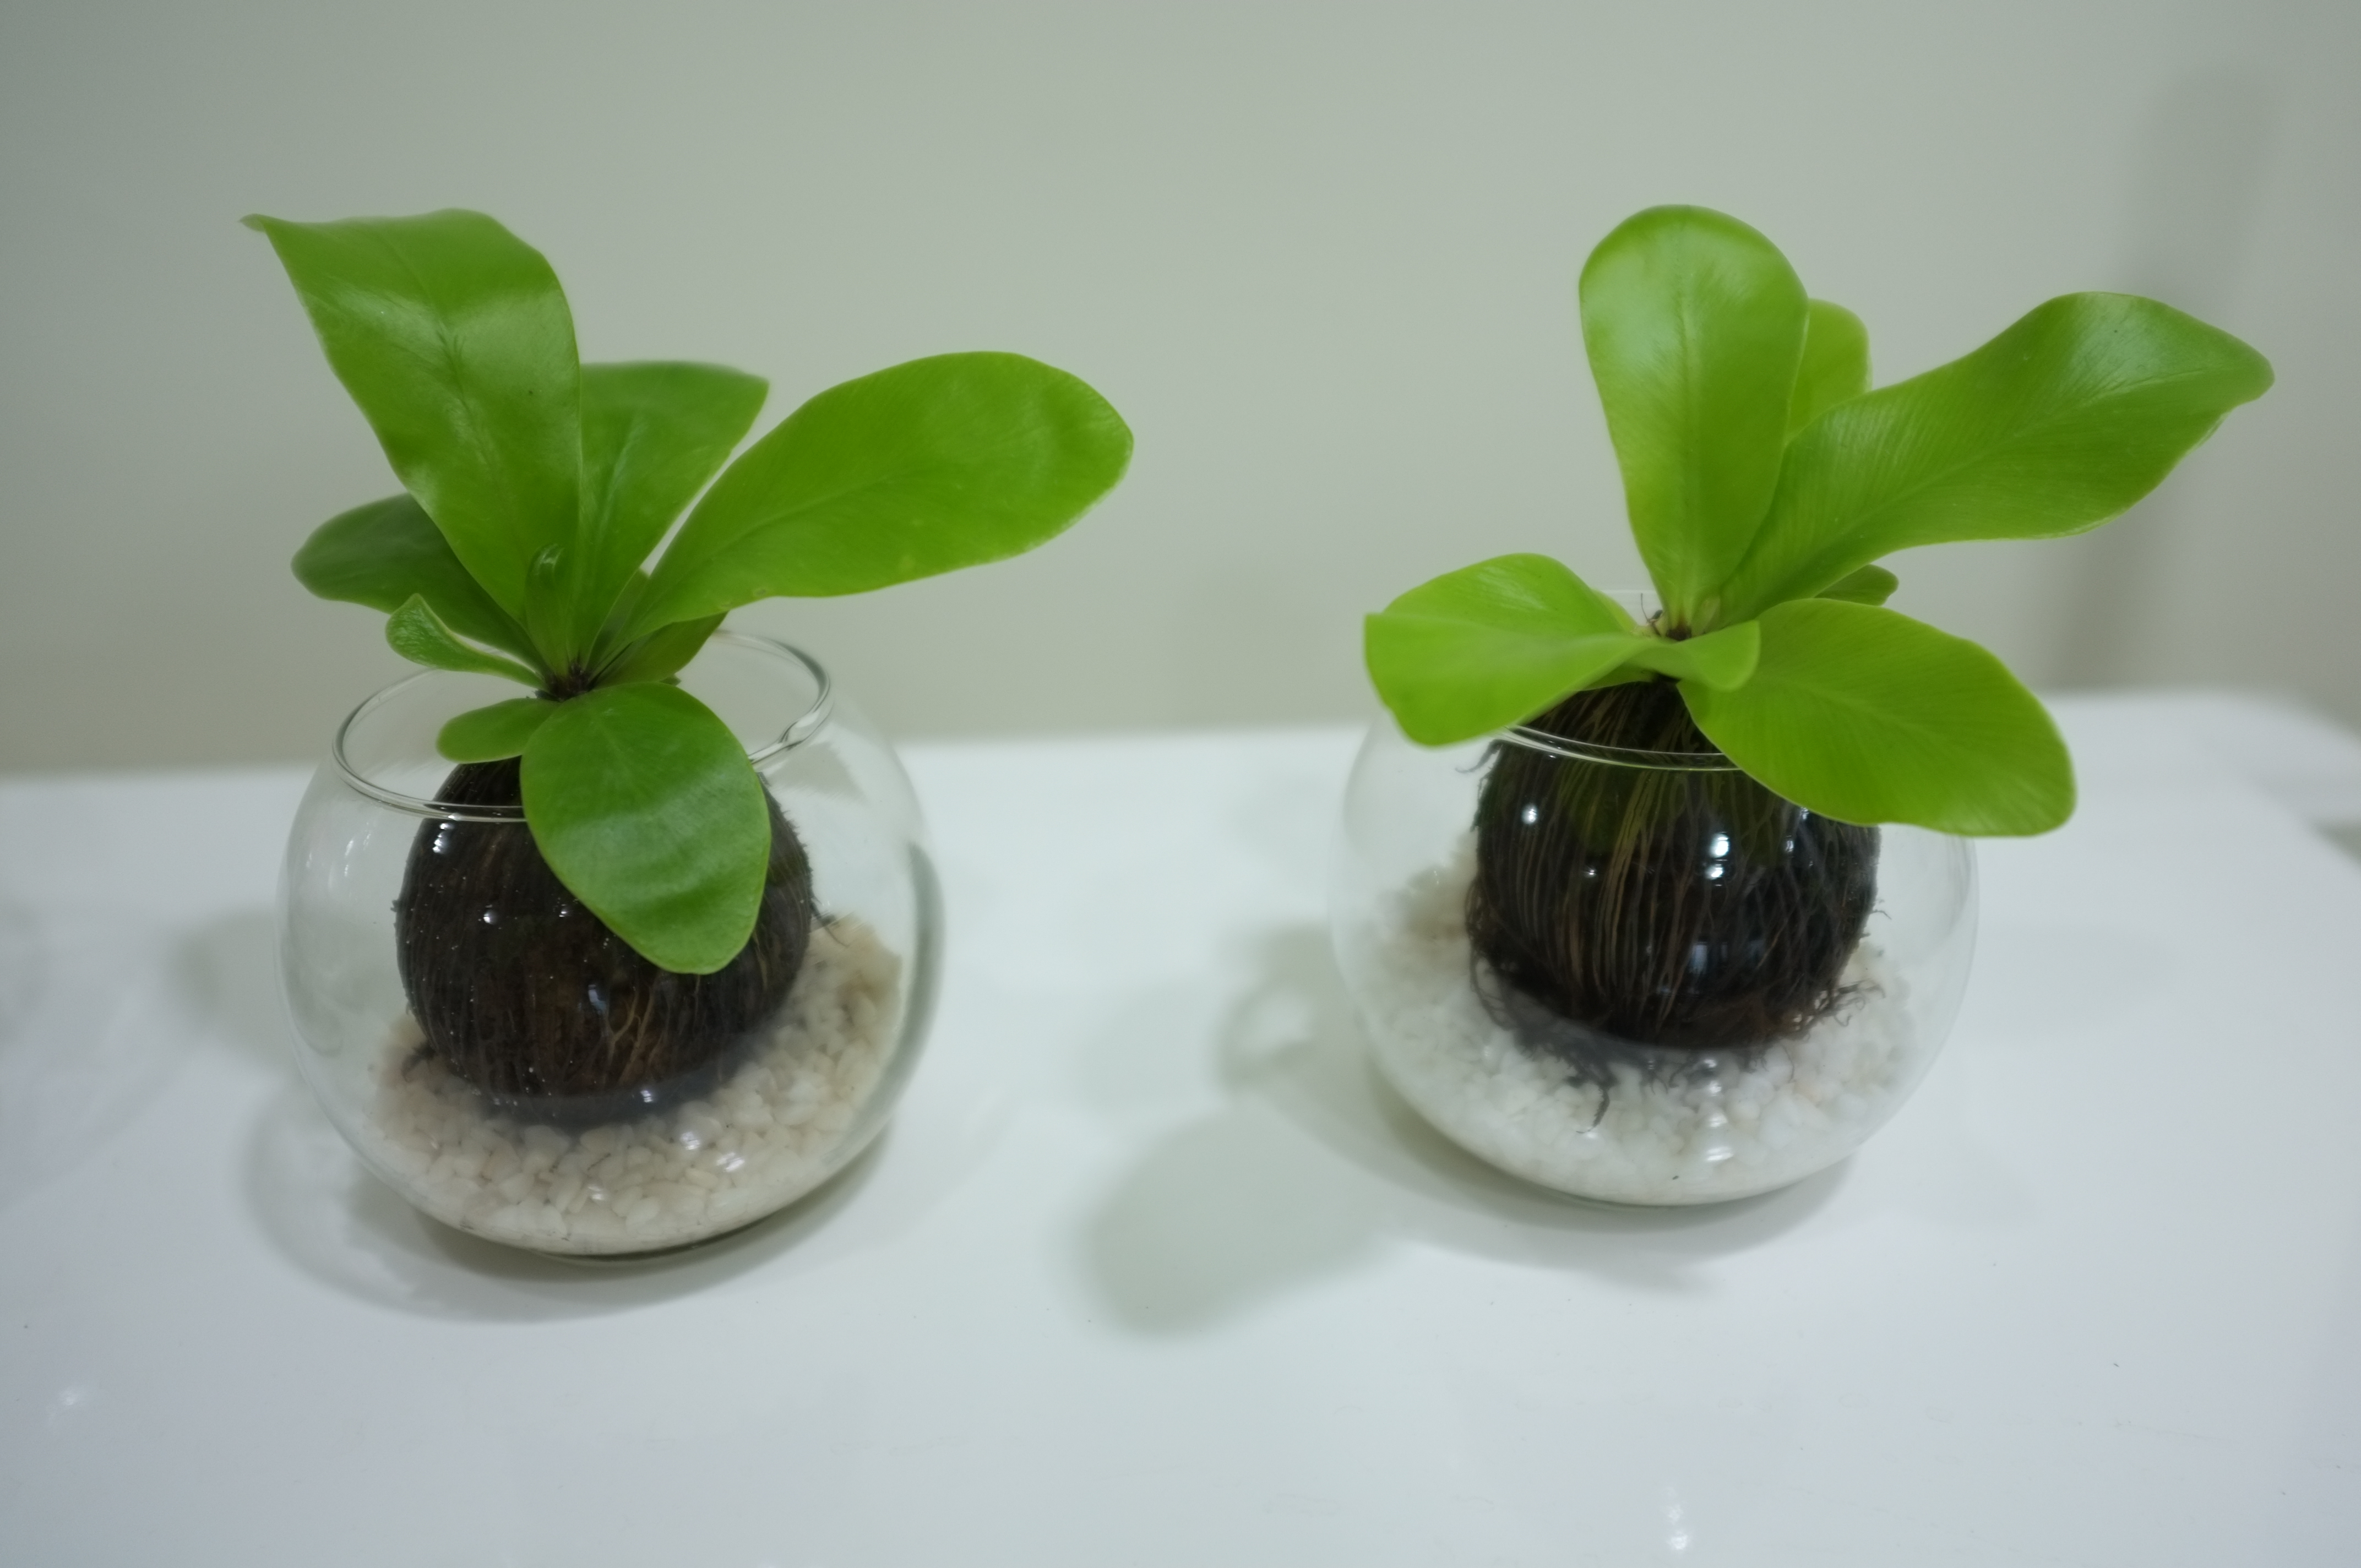  Small  Plants  for Home  Deco GARDENING IS FUN